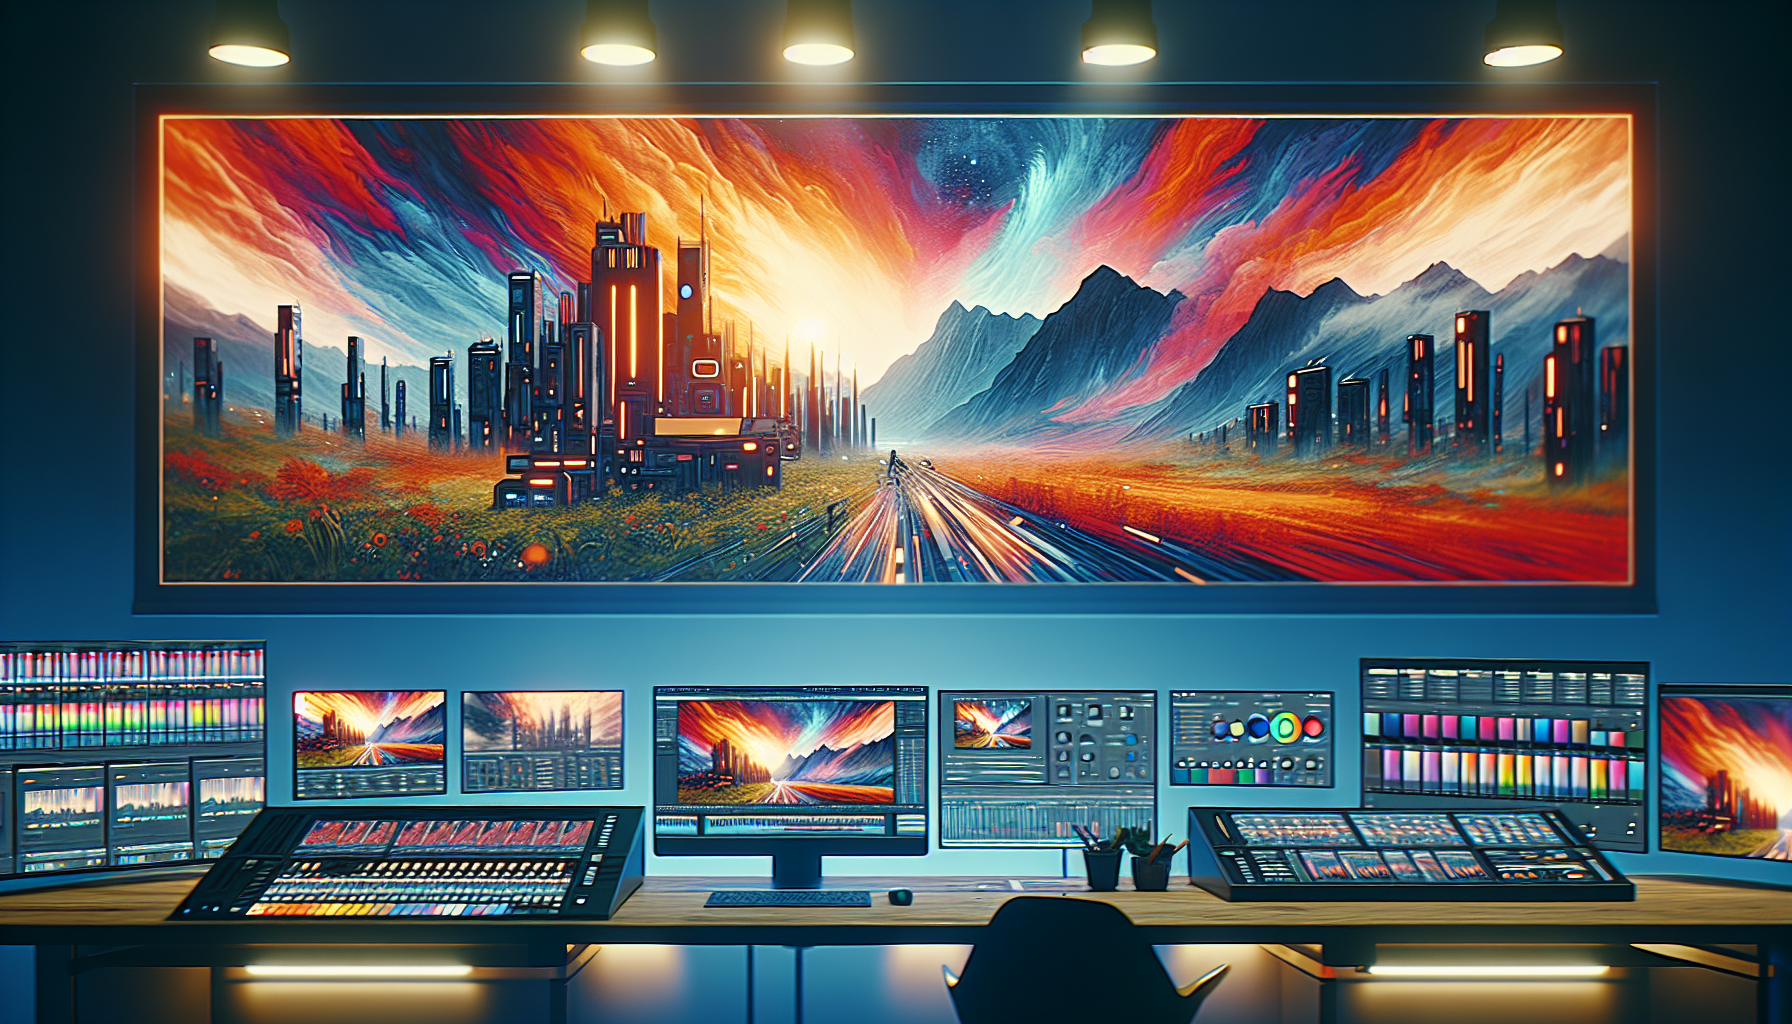 Detailed digital artwork of an artist using Blackmagic DaVinci Resolve 19 on a futuristic computer setup, showcasing the new AI Neural Engine tools and vibrant color grading on multiple monitors in a